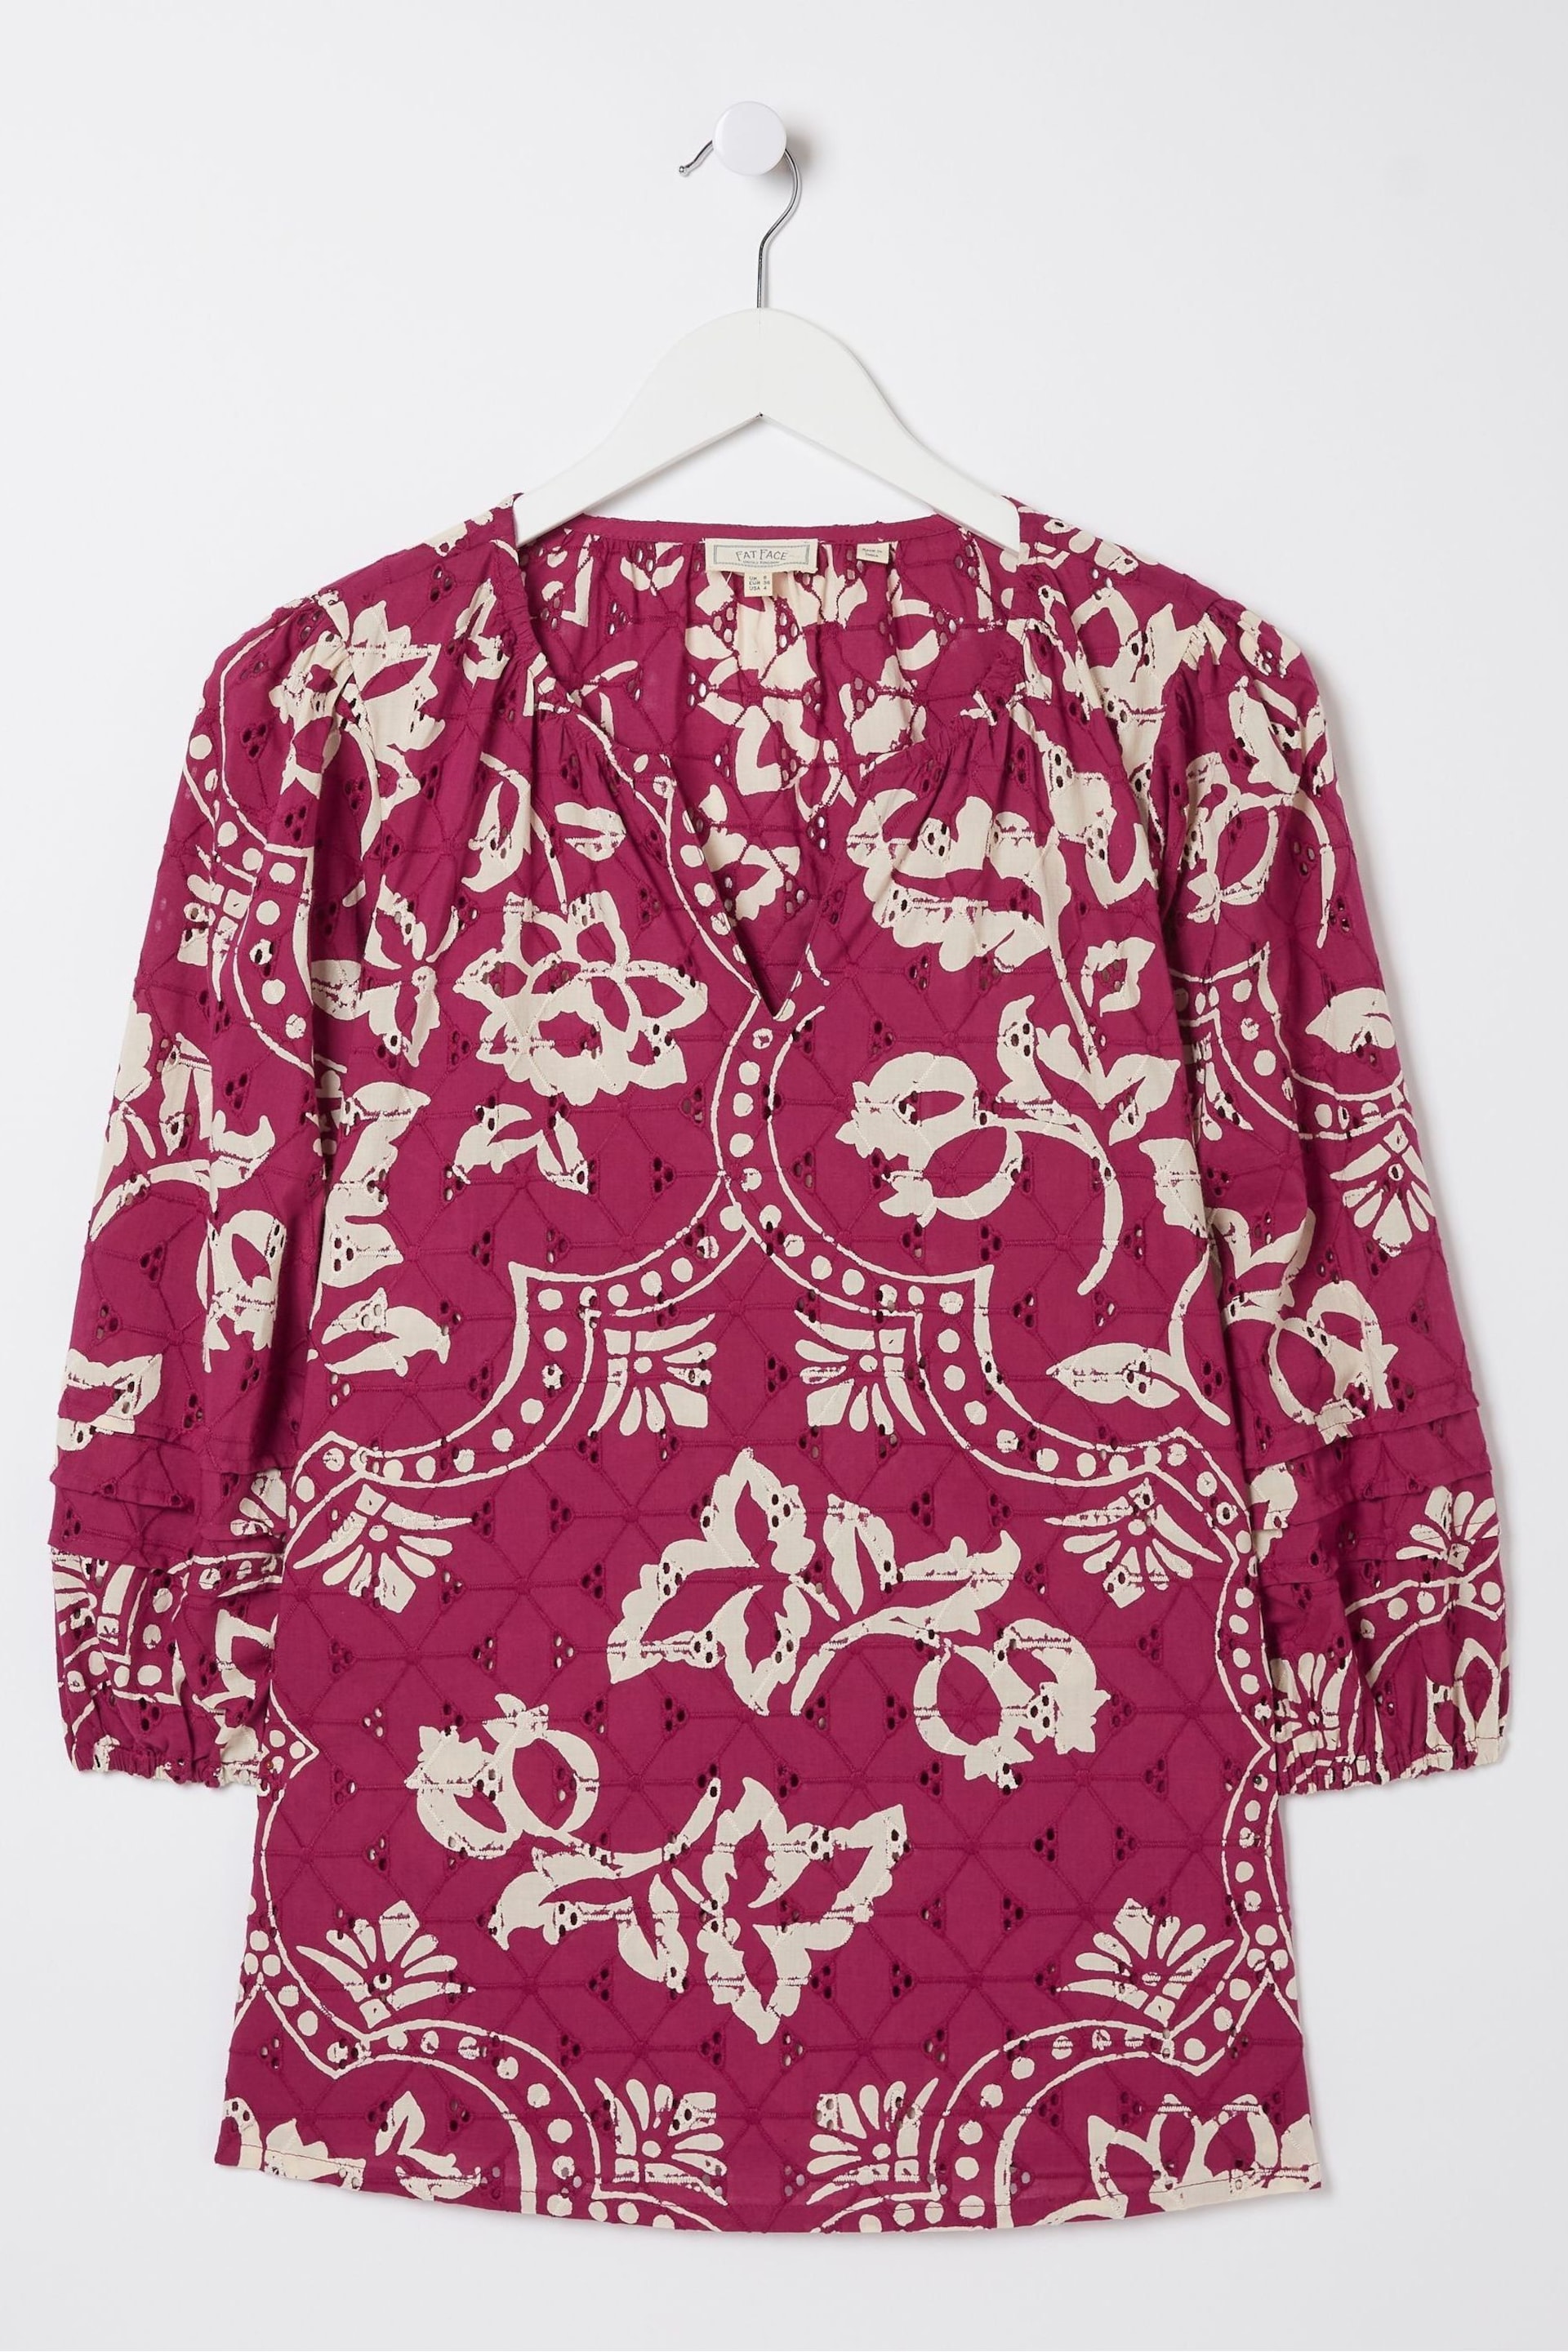 FatFace Purple Imogen Broderie Floral Blouse - Image 6 of 6